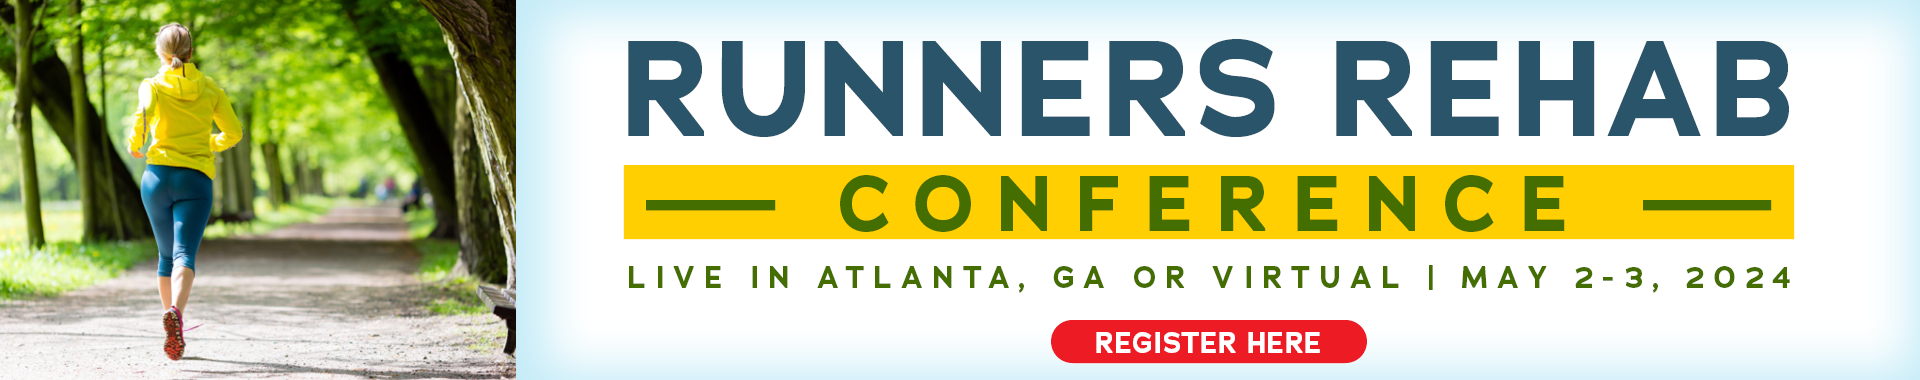 Runners Rehab Conference: A Clinical Analysis of Running Performance